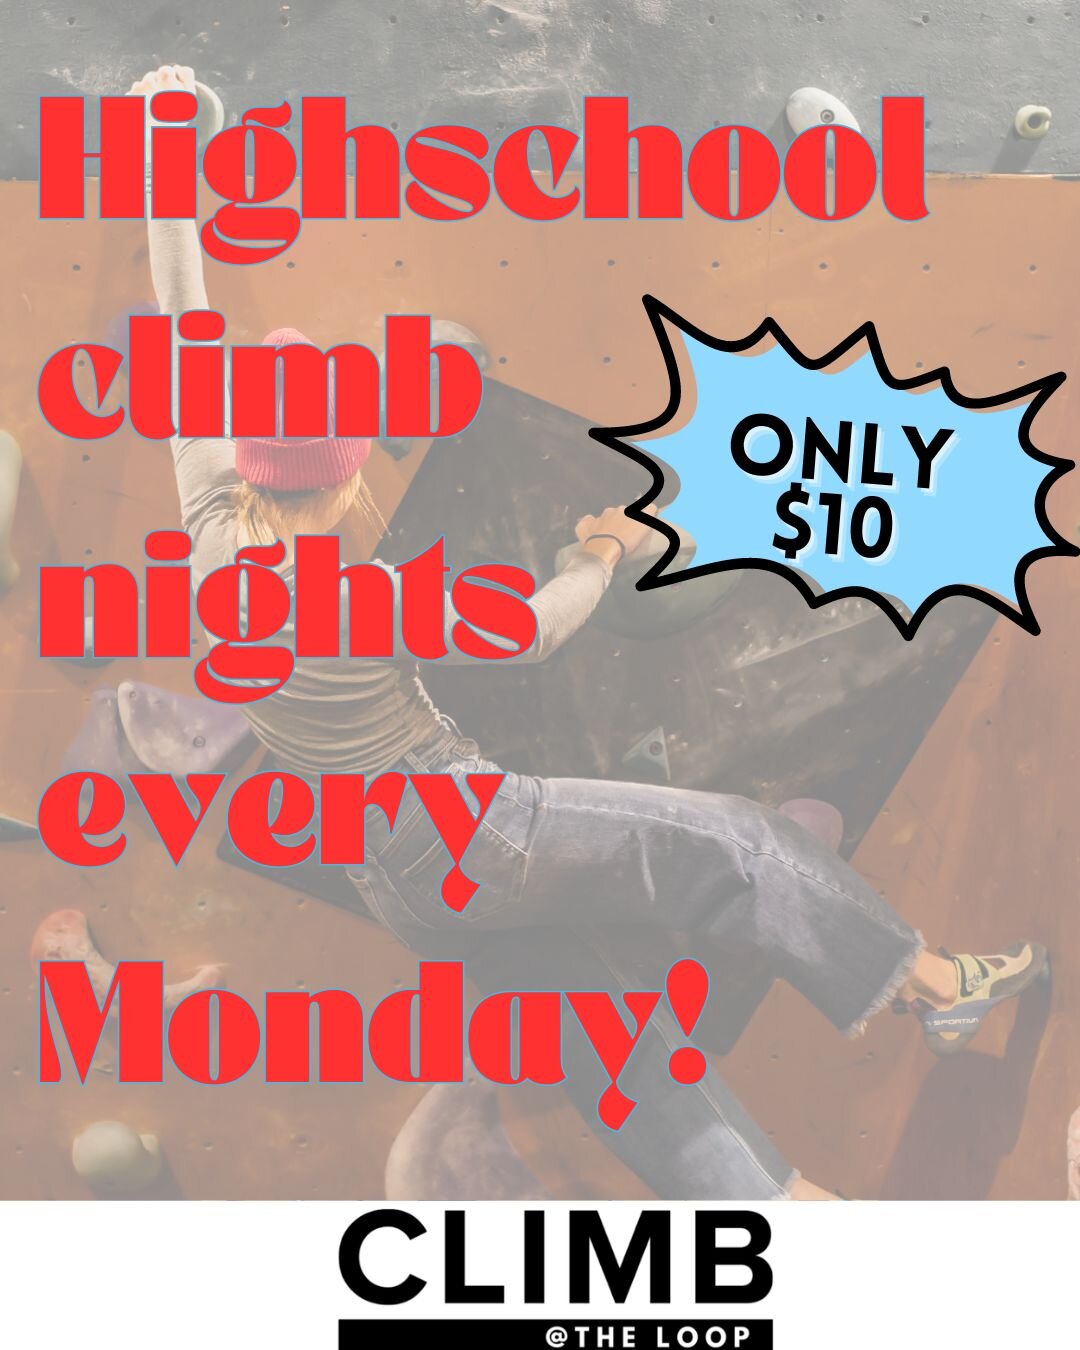 Attention high schoolers! Climb for only $10 EVERY MONDAY NIGHT!

🌟 Monday nights at CLIMB @ The Loop aren't just about climbing &ndash; they're about growth, friends, and endless fun! Did you know that climbing offers benefits for high school stude